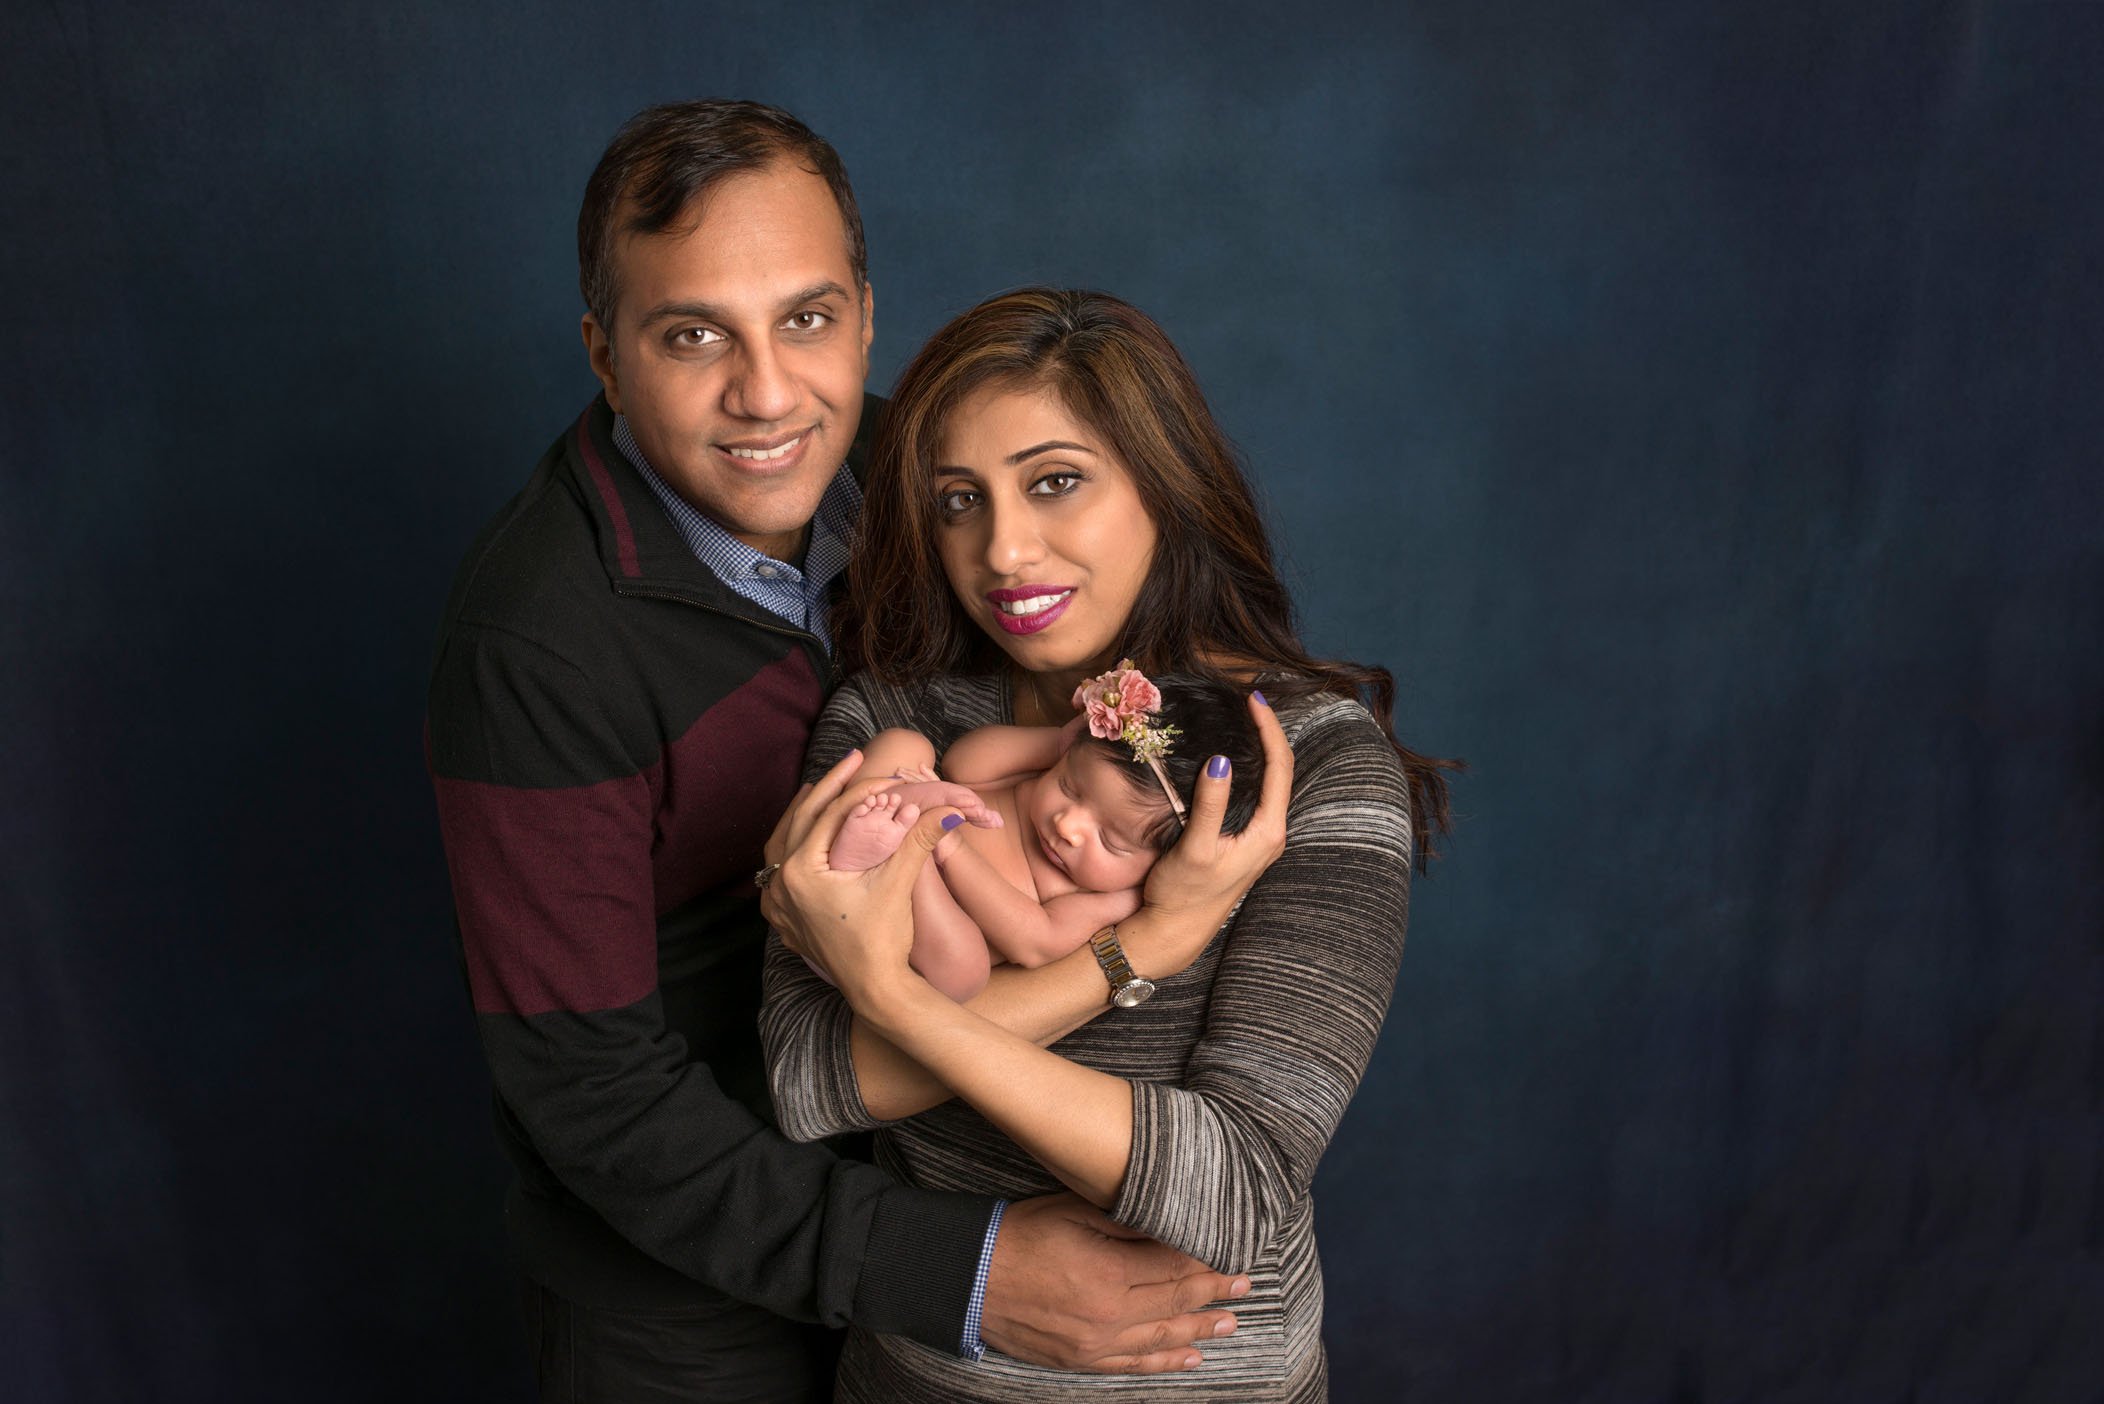 Indian mom, dad and newborn baby girl in arms